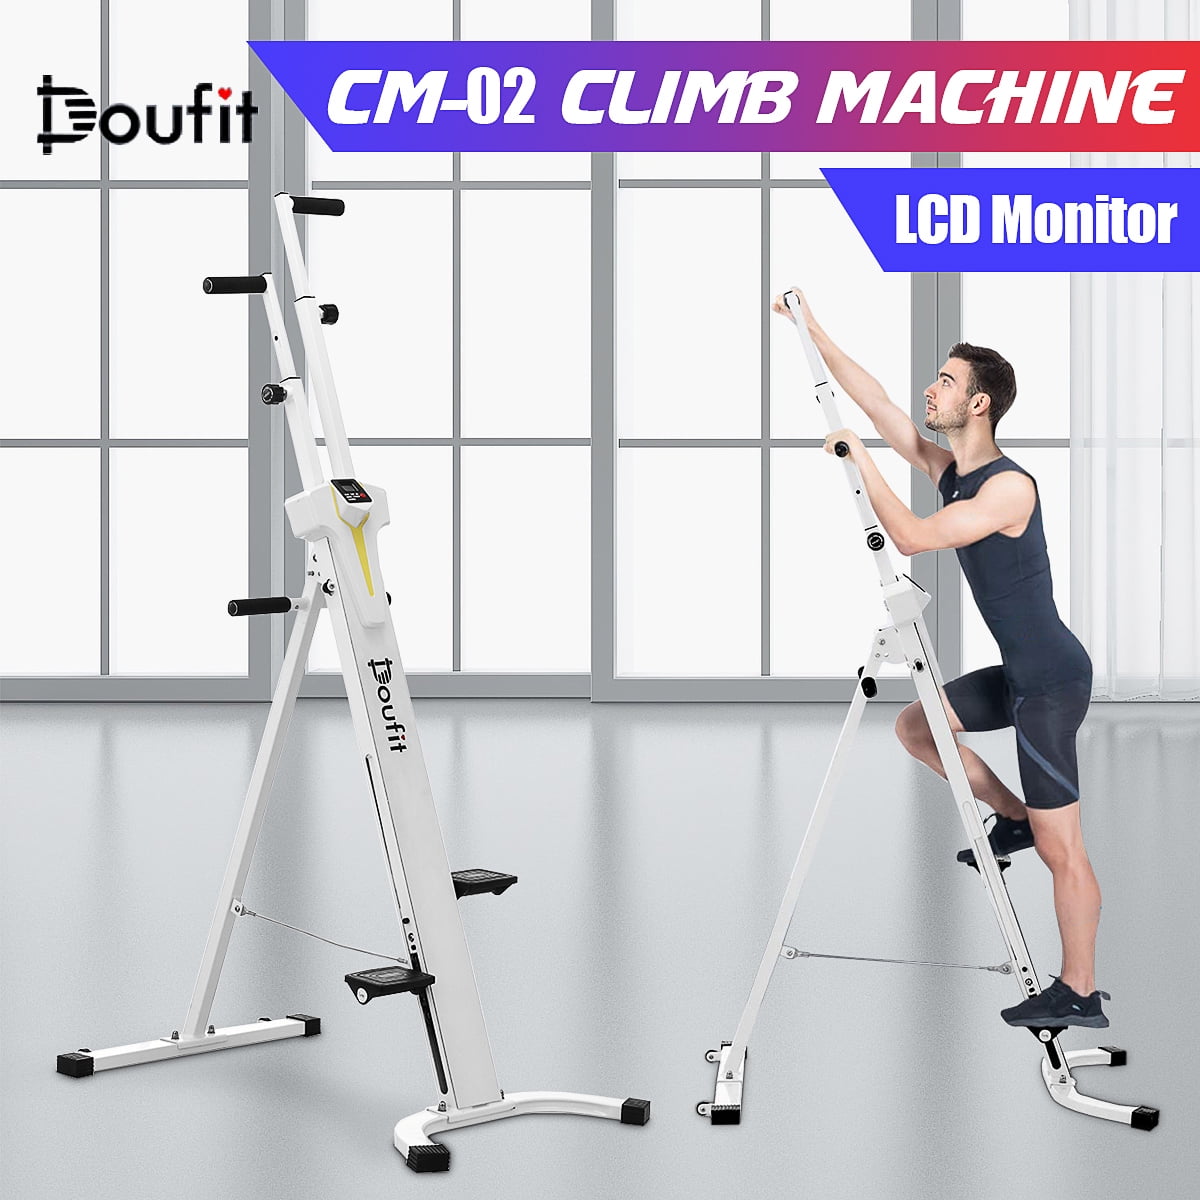 Vertical Climber Exercise Machine Doufit Folding Cardio Full Body Workout Climbing Stair Stepper for Home Gym with LCD Monitor 